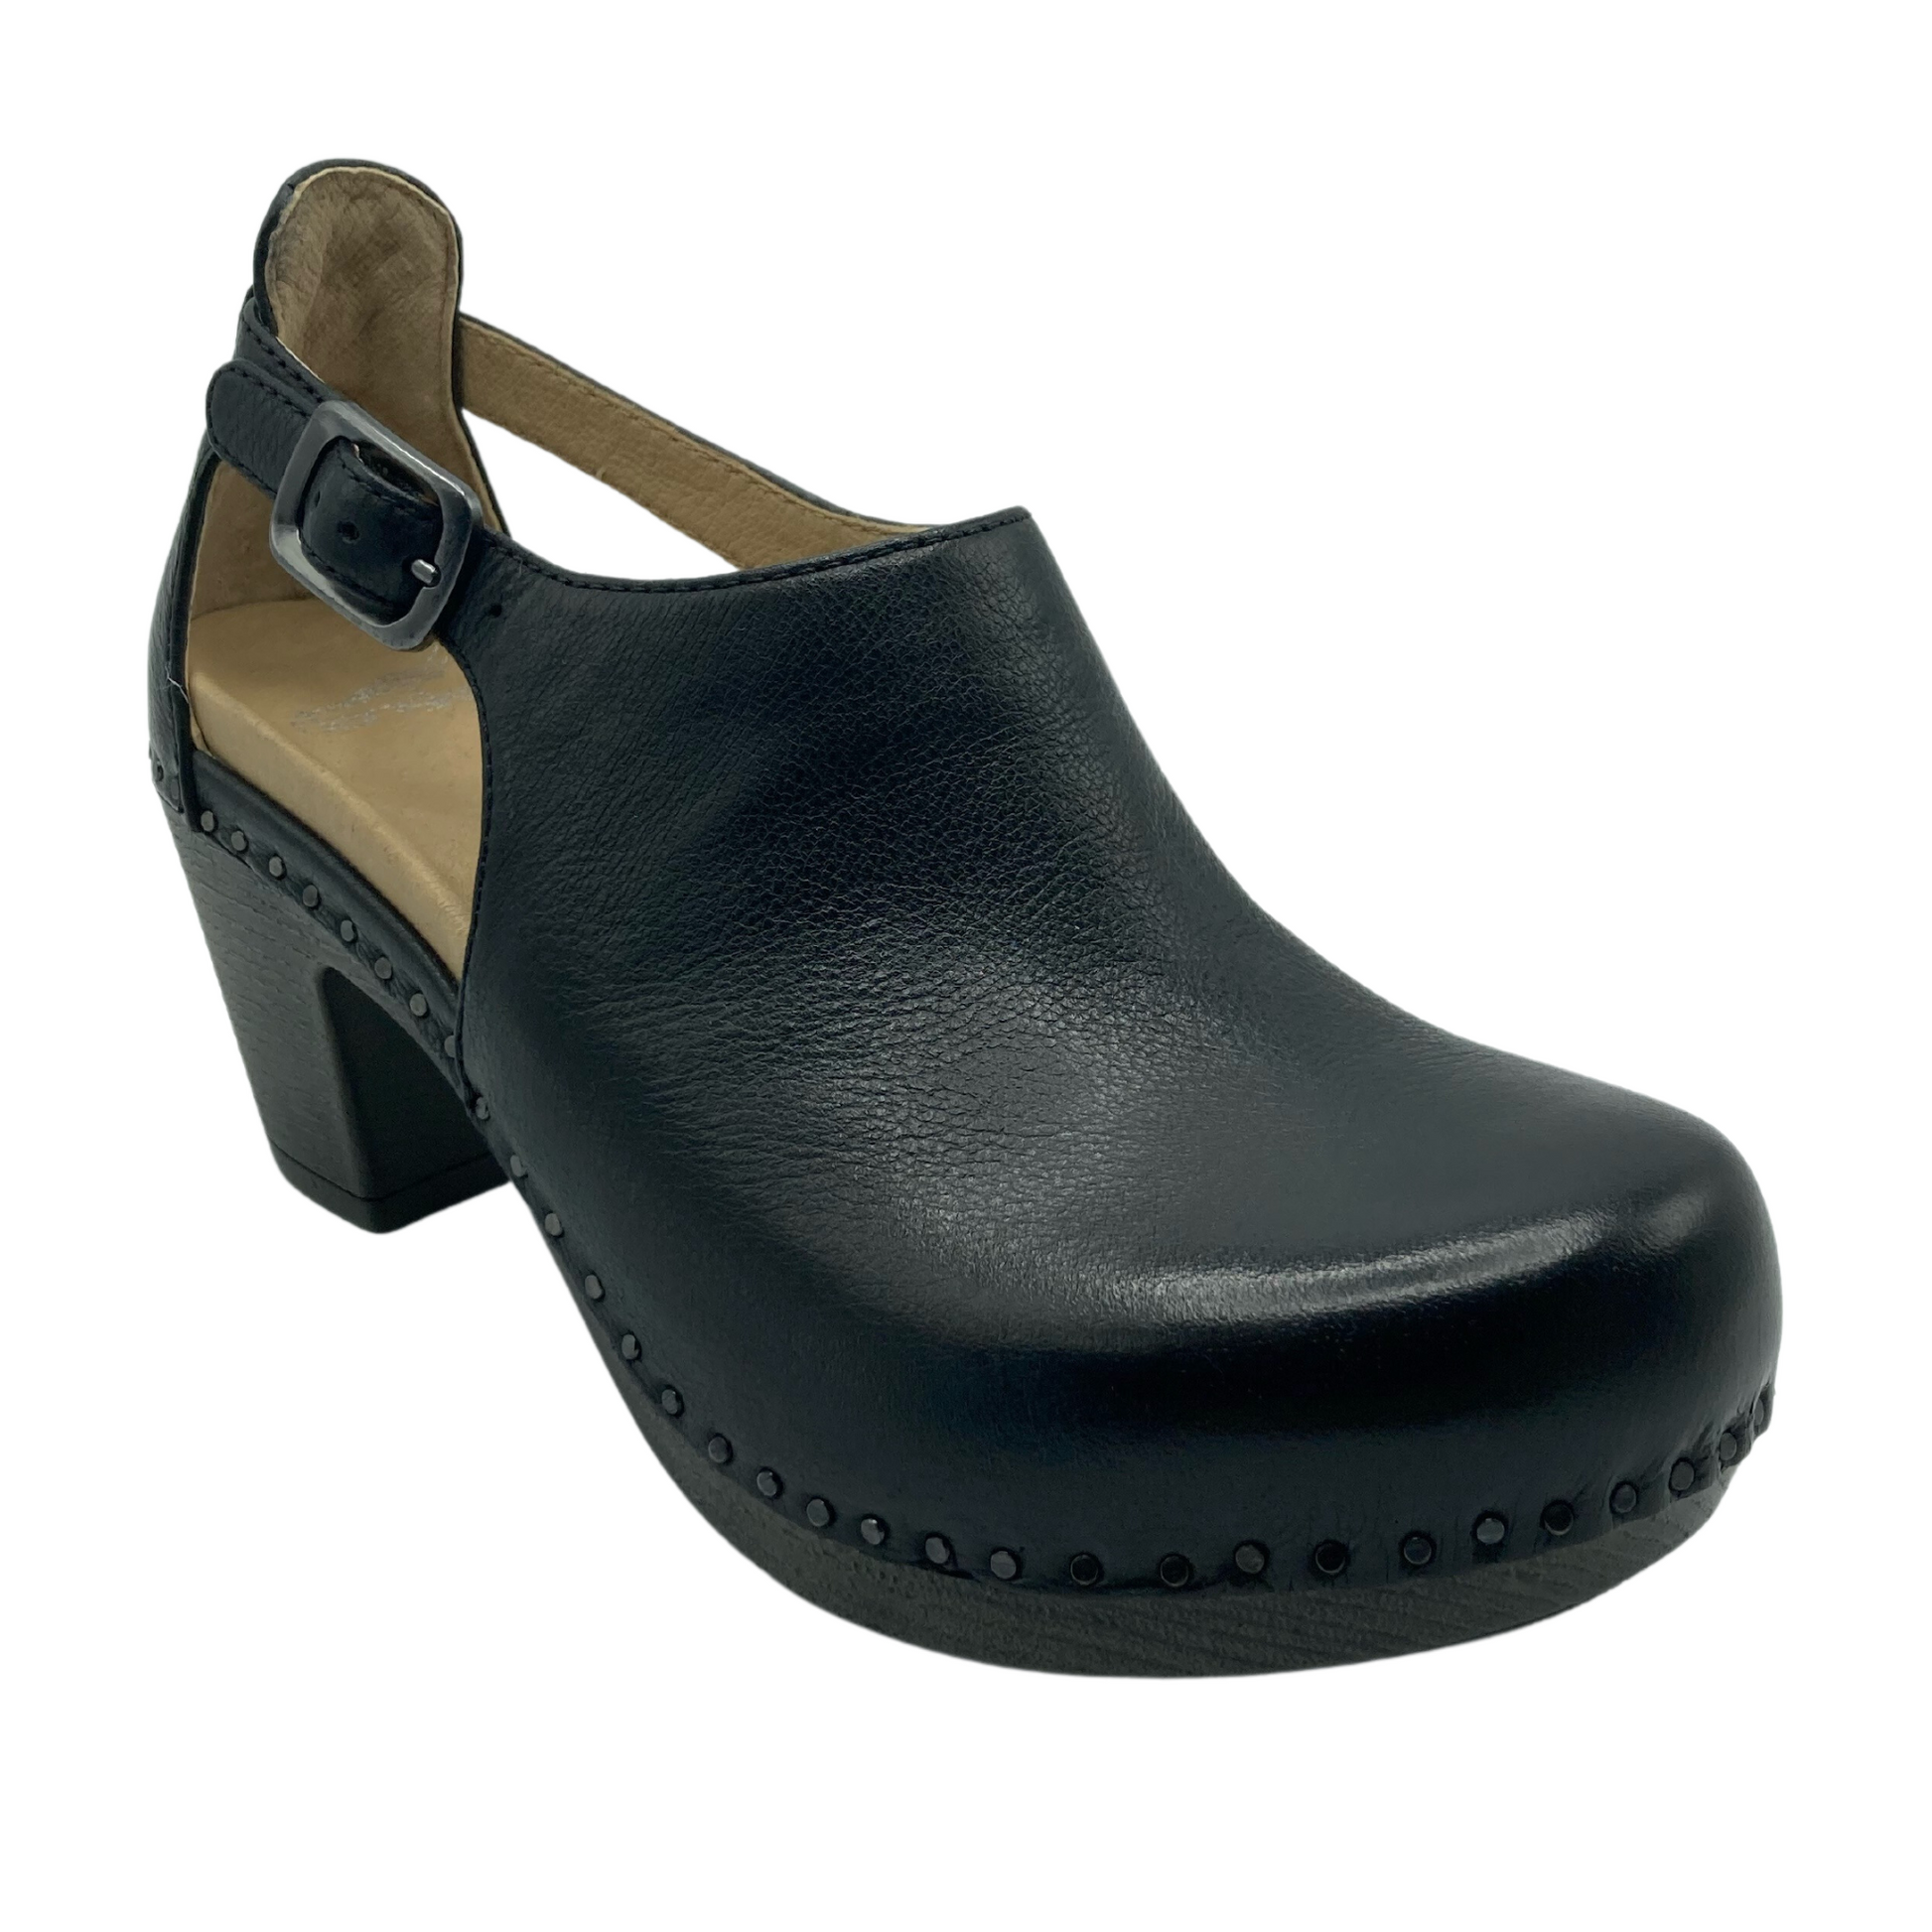 45 degree angled view of black leather clog with silver buckle detail and chunky heel